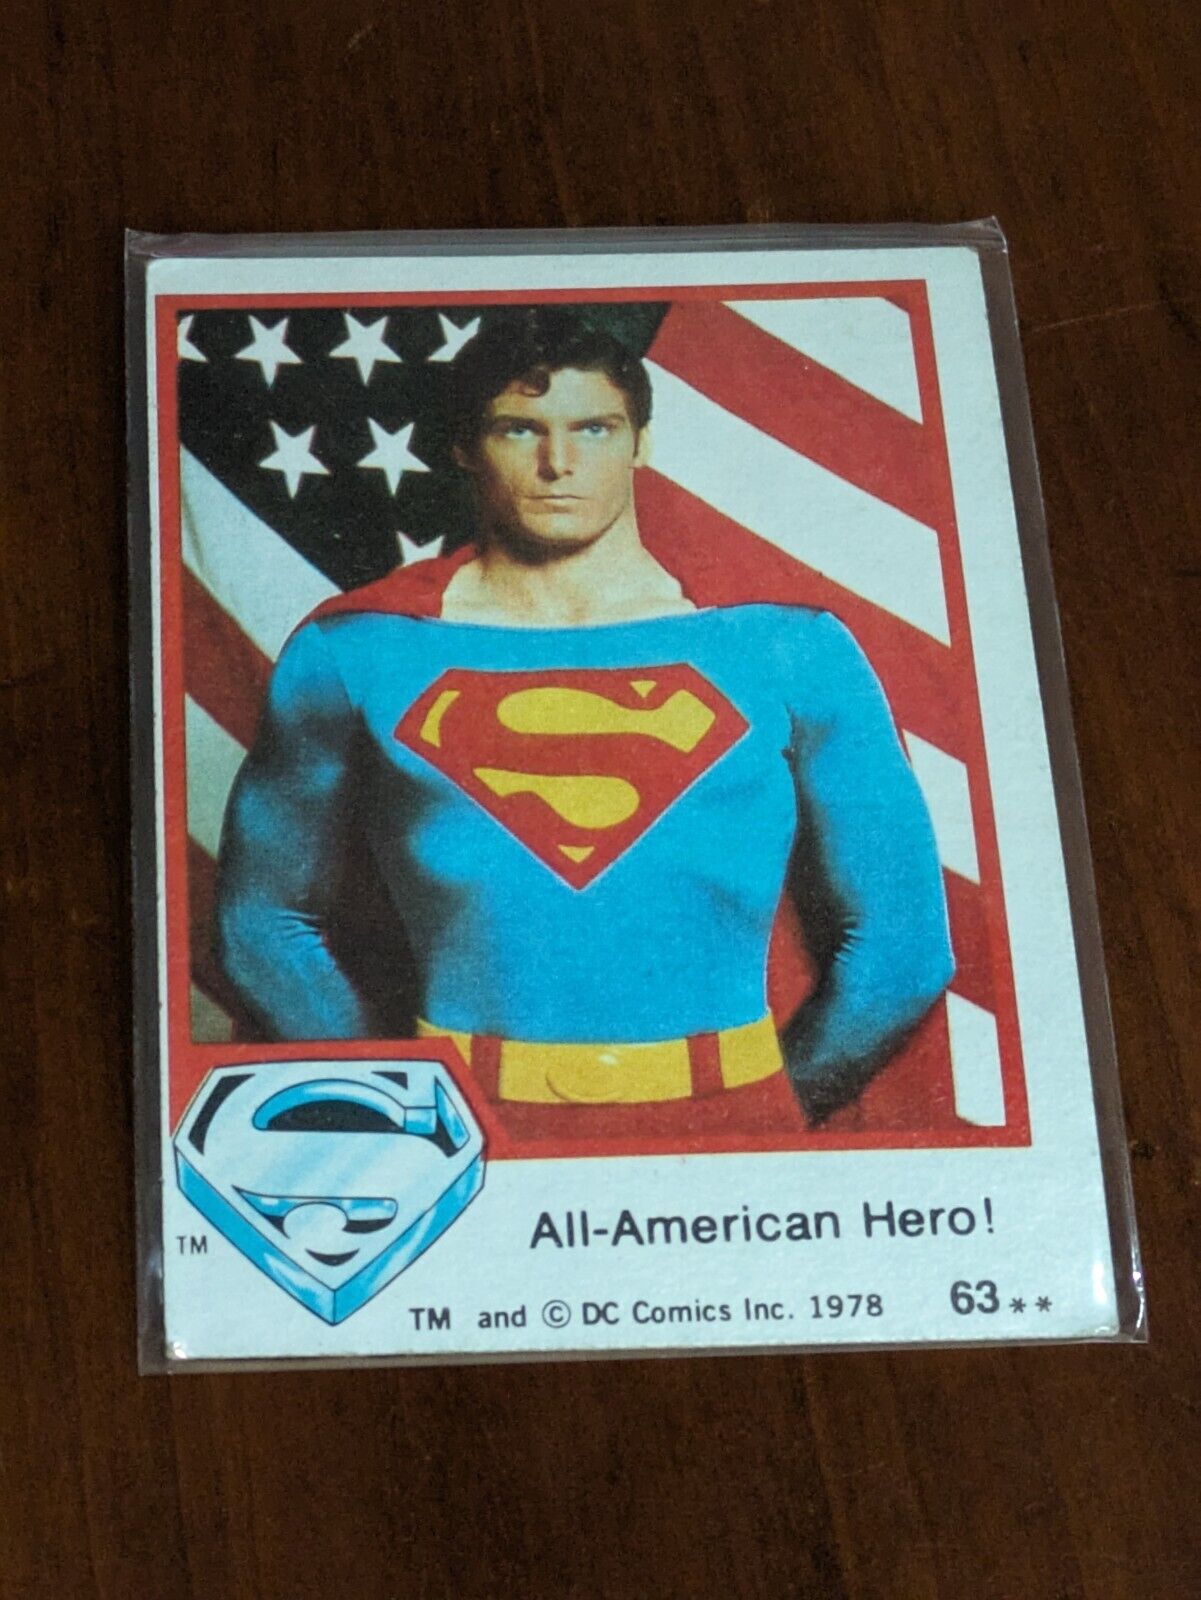 SUPERMAN CHRISTOPHER REEVES 1978 TRADING CARD #63 ALL-AMERICAN HERO DC COMICS